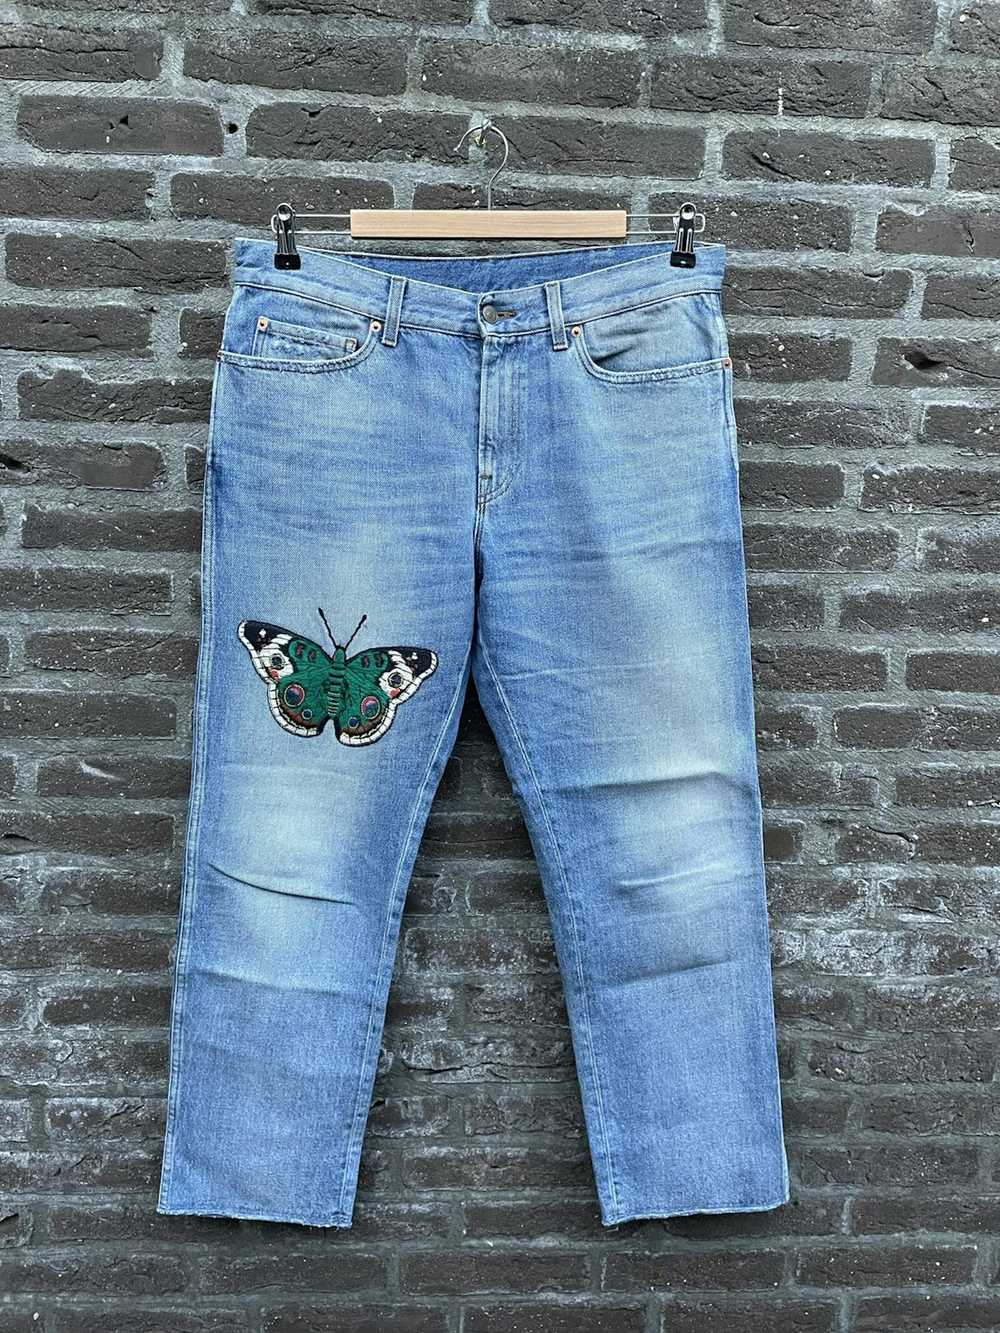 Gucci Butterfly Embroidered Jeans - image 2